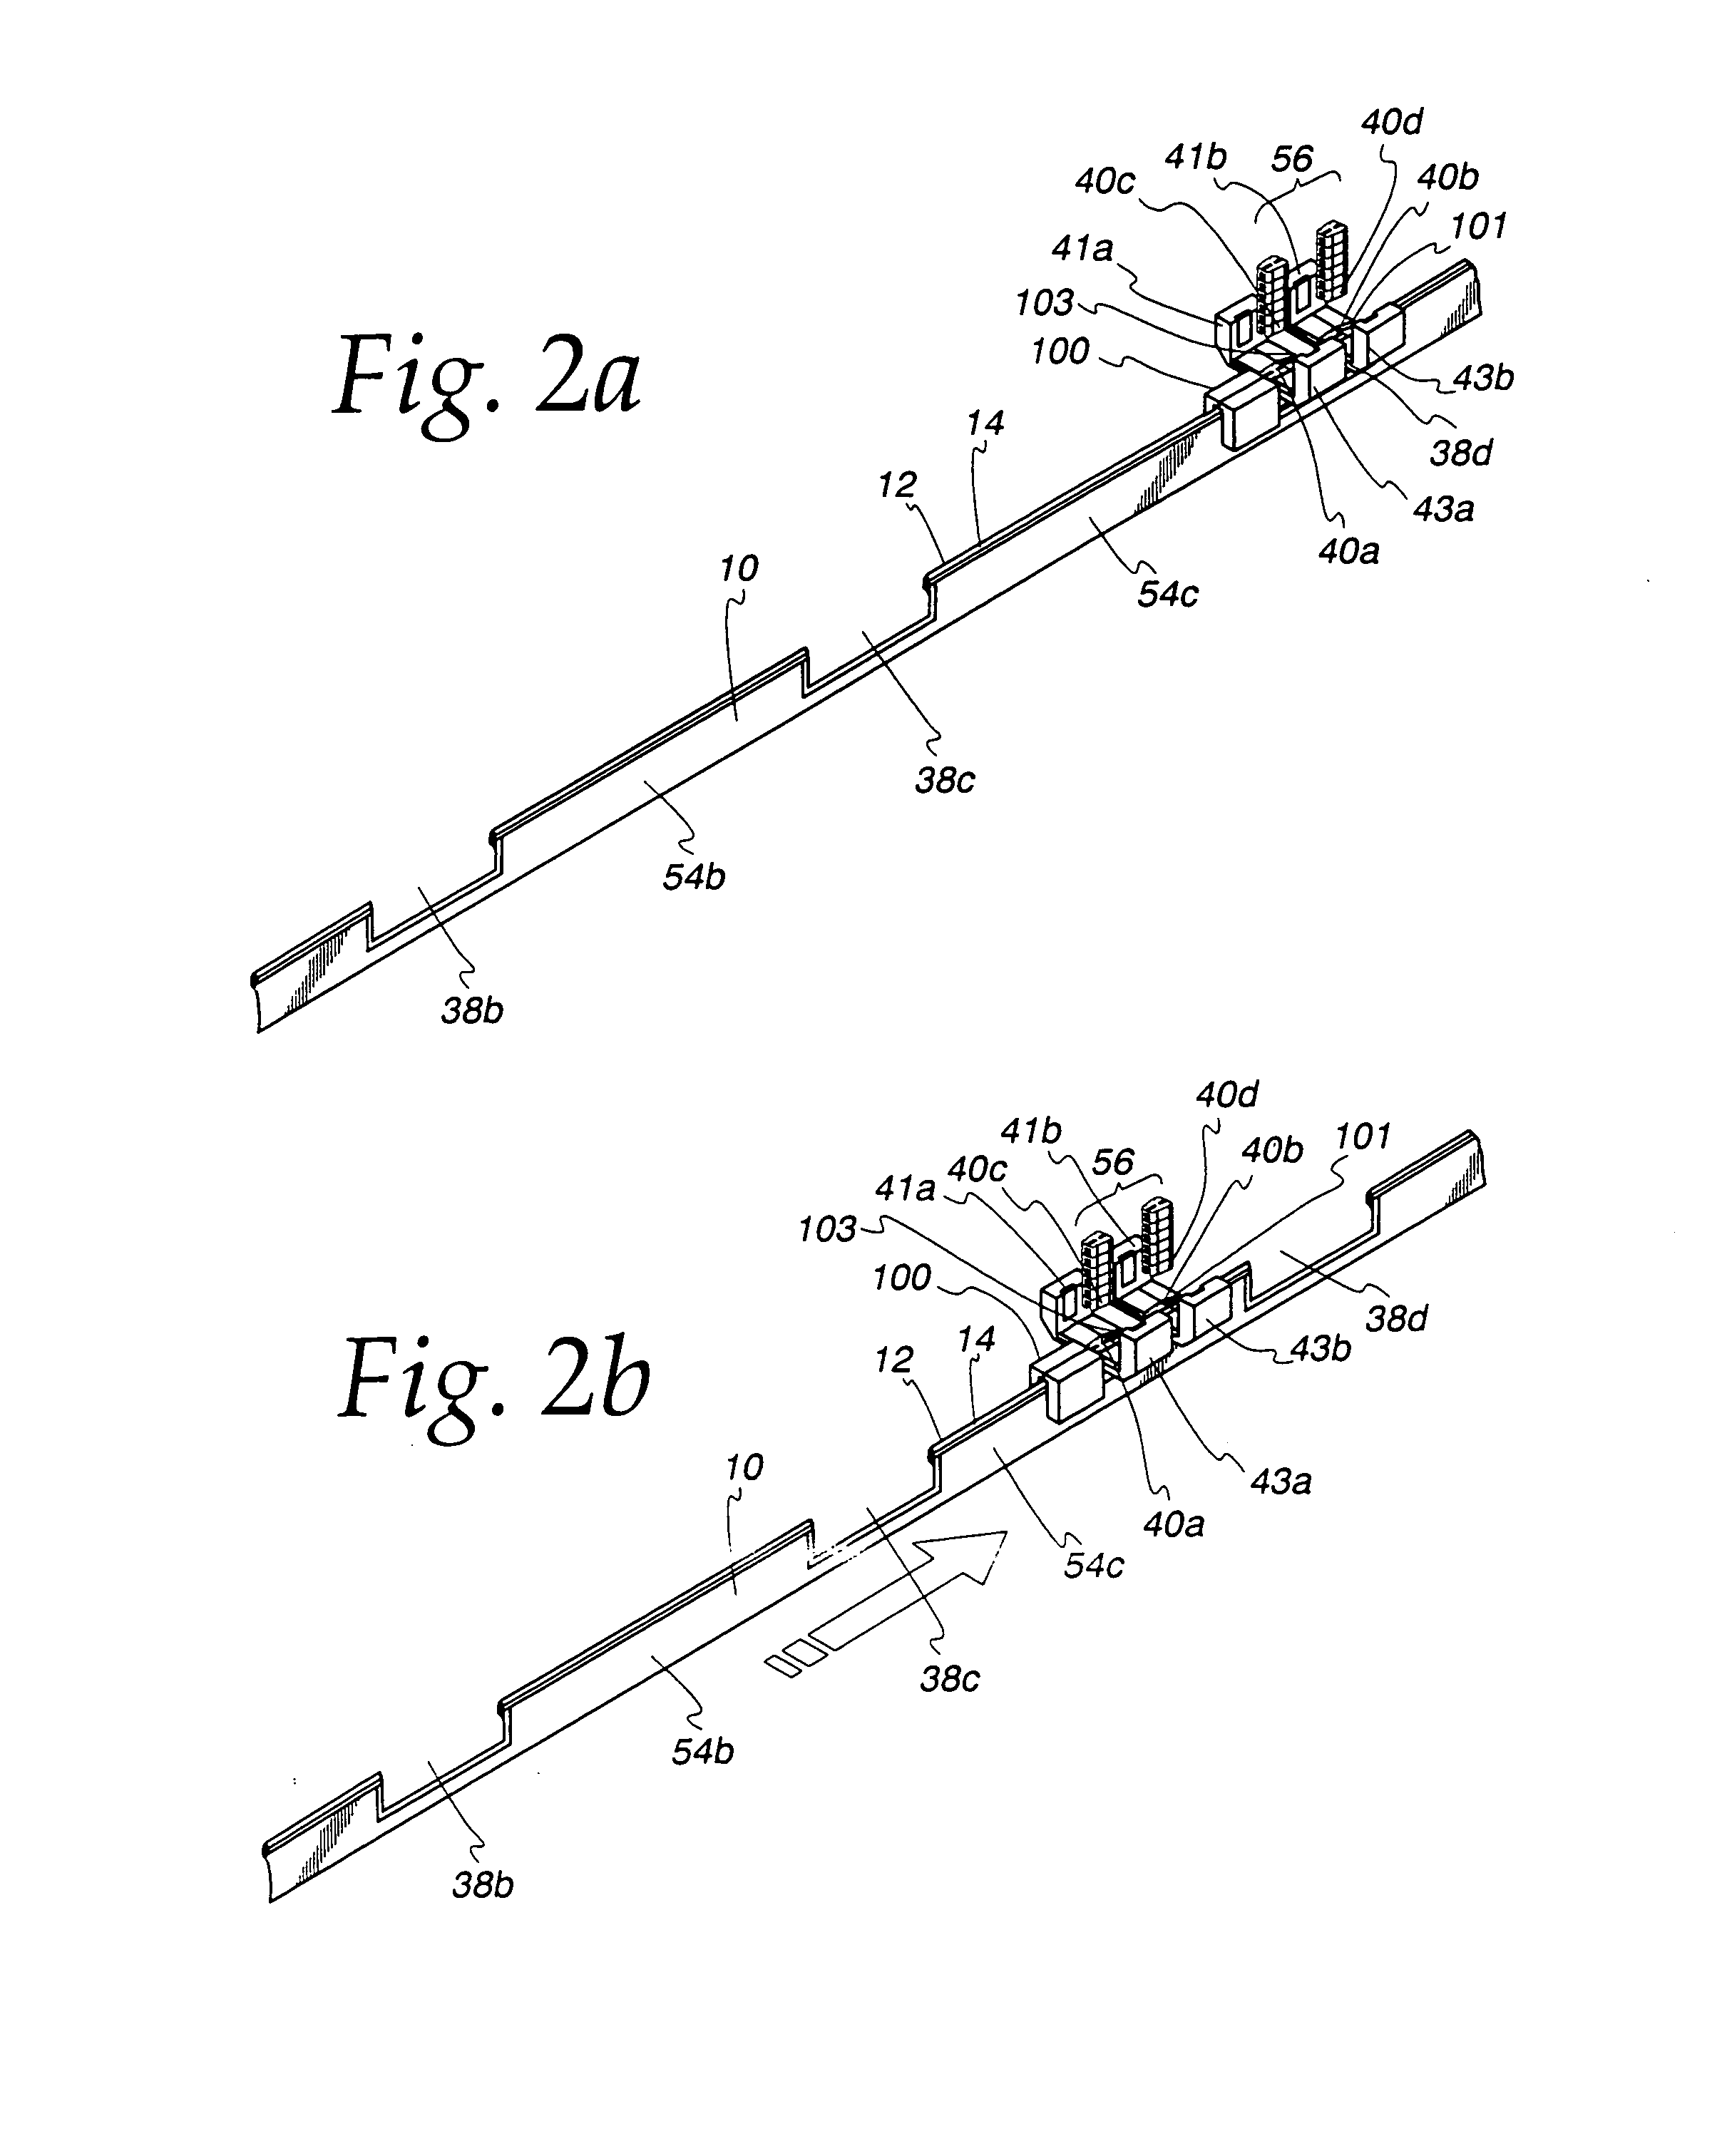 Methods for applying sliders to reclosable plastic bags